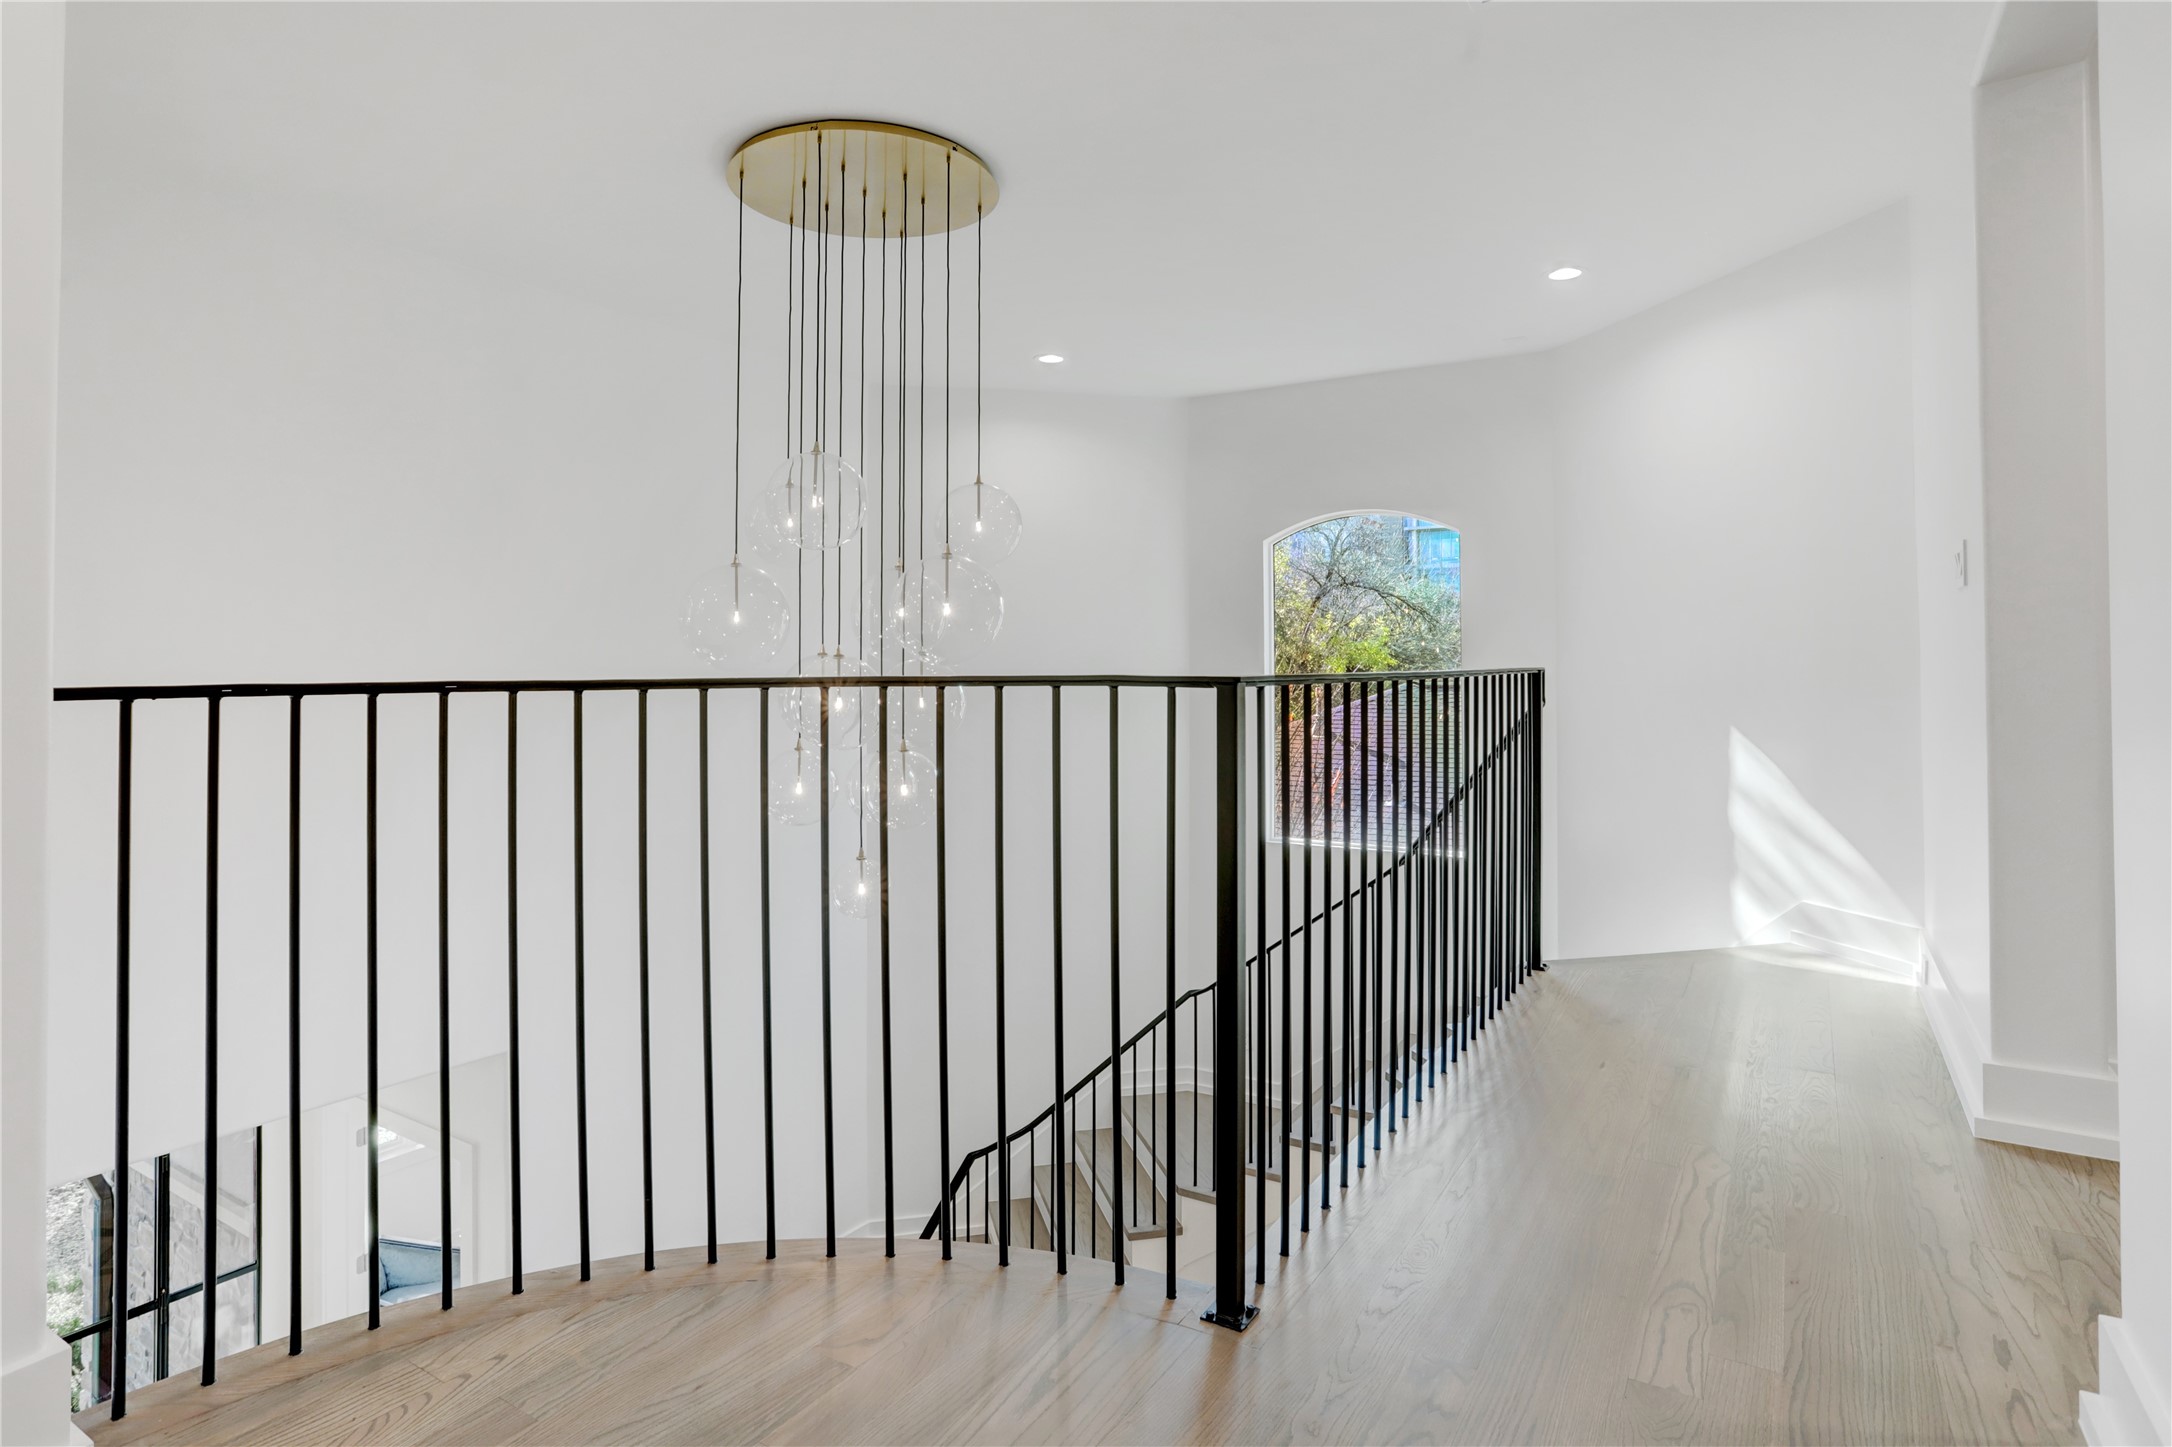 Take in this awe inspiring Foyer Chandelier from the second floor landing.